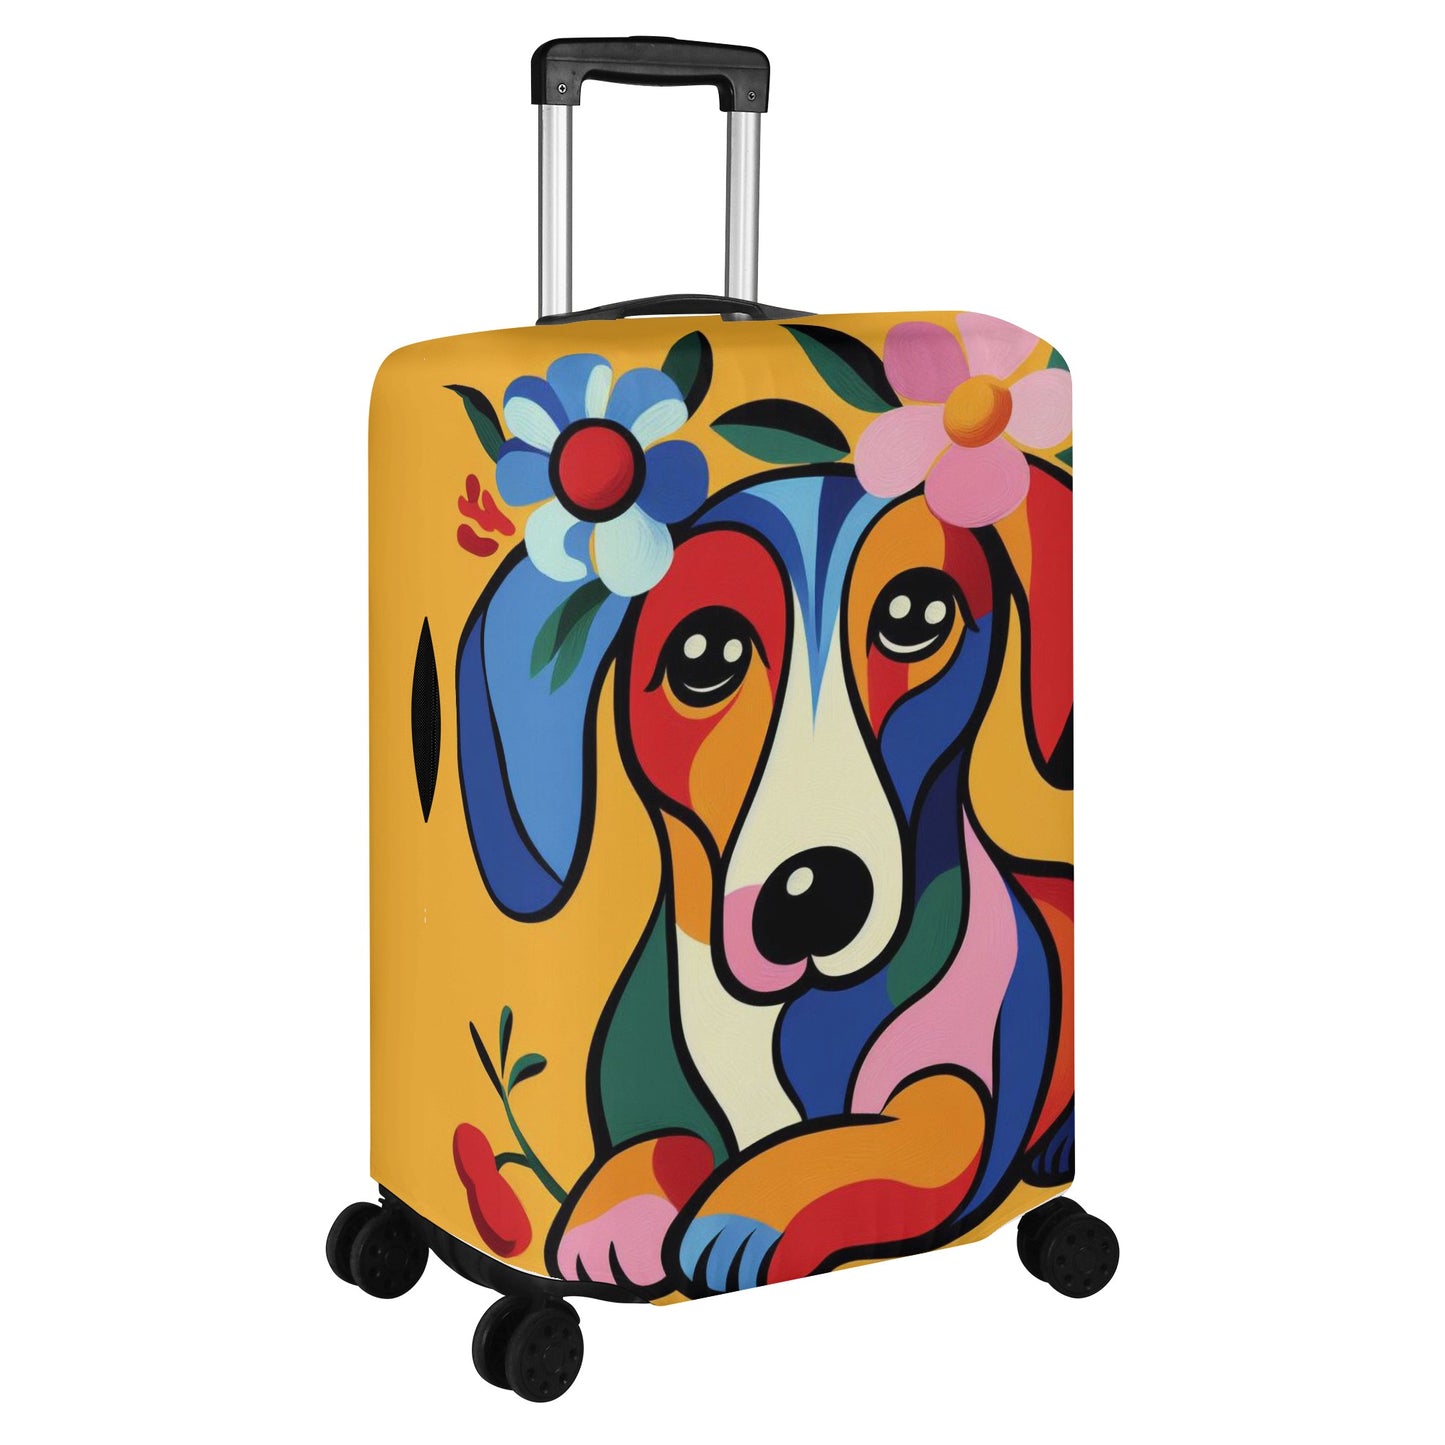 Cookie - Luggage Cover